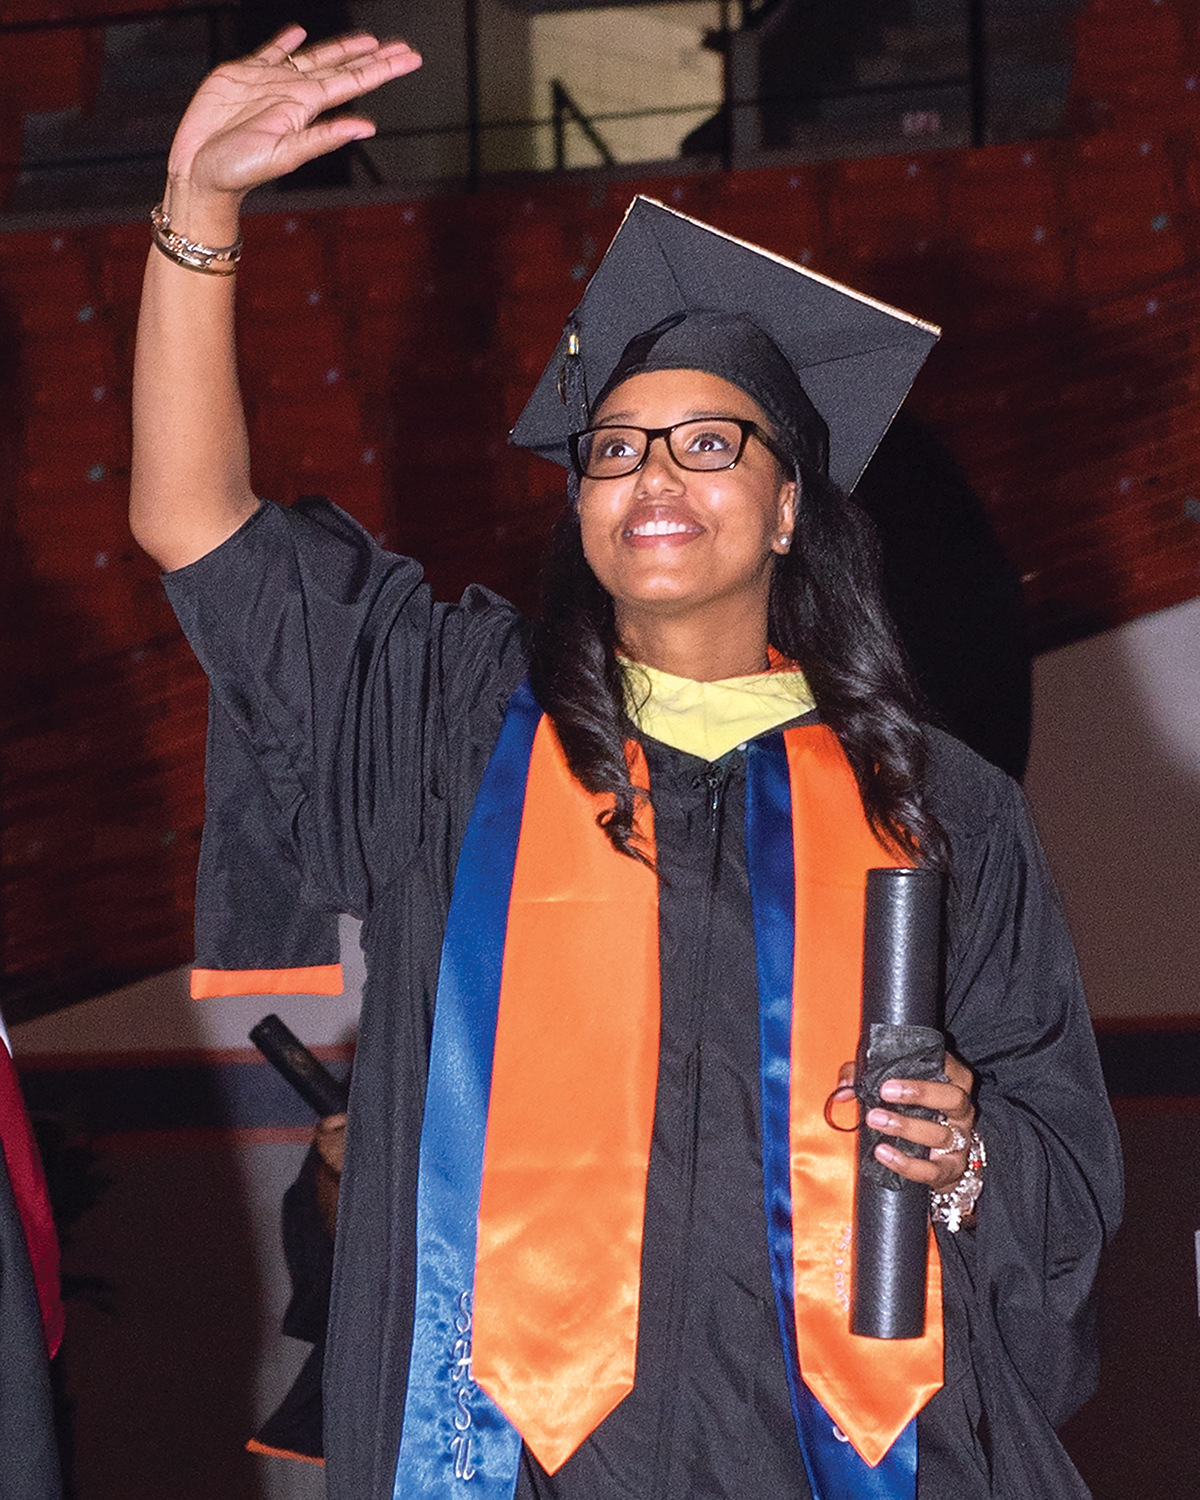 A student waves to the audience as she crosses the stage with her degree.